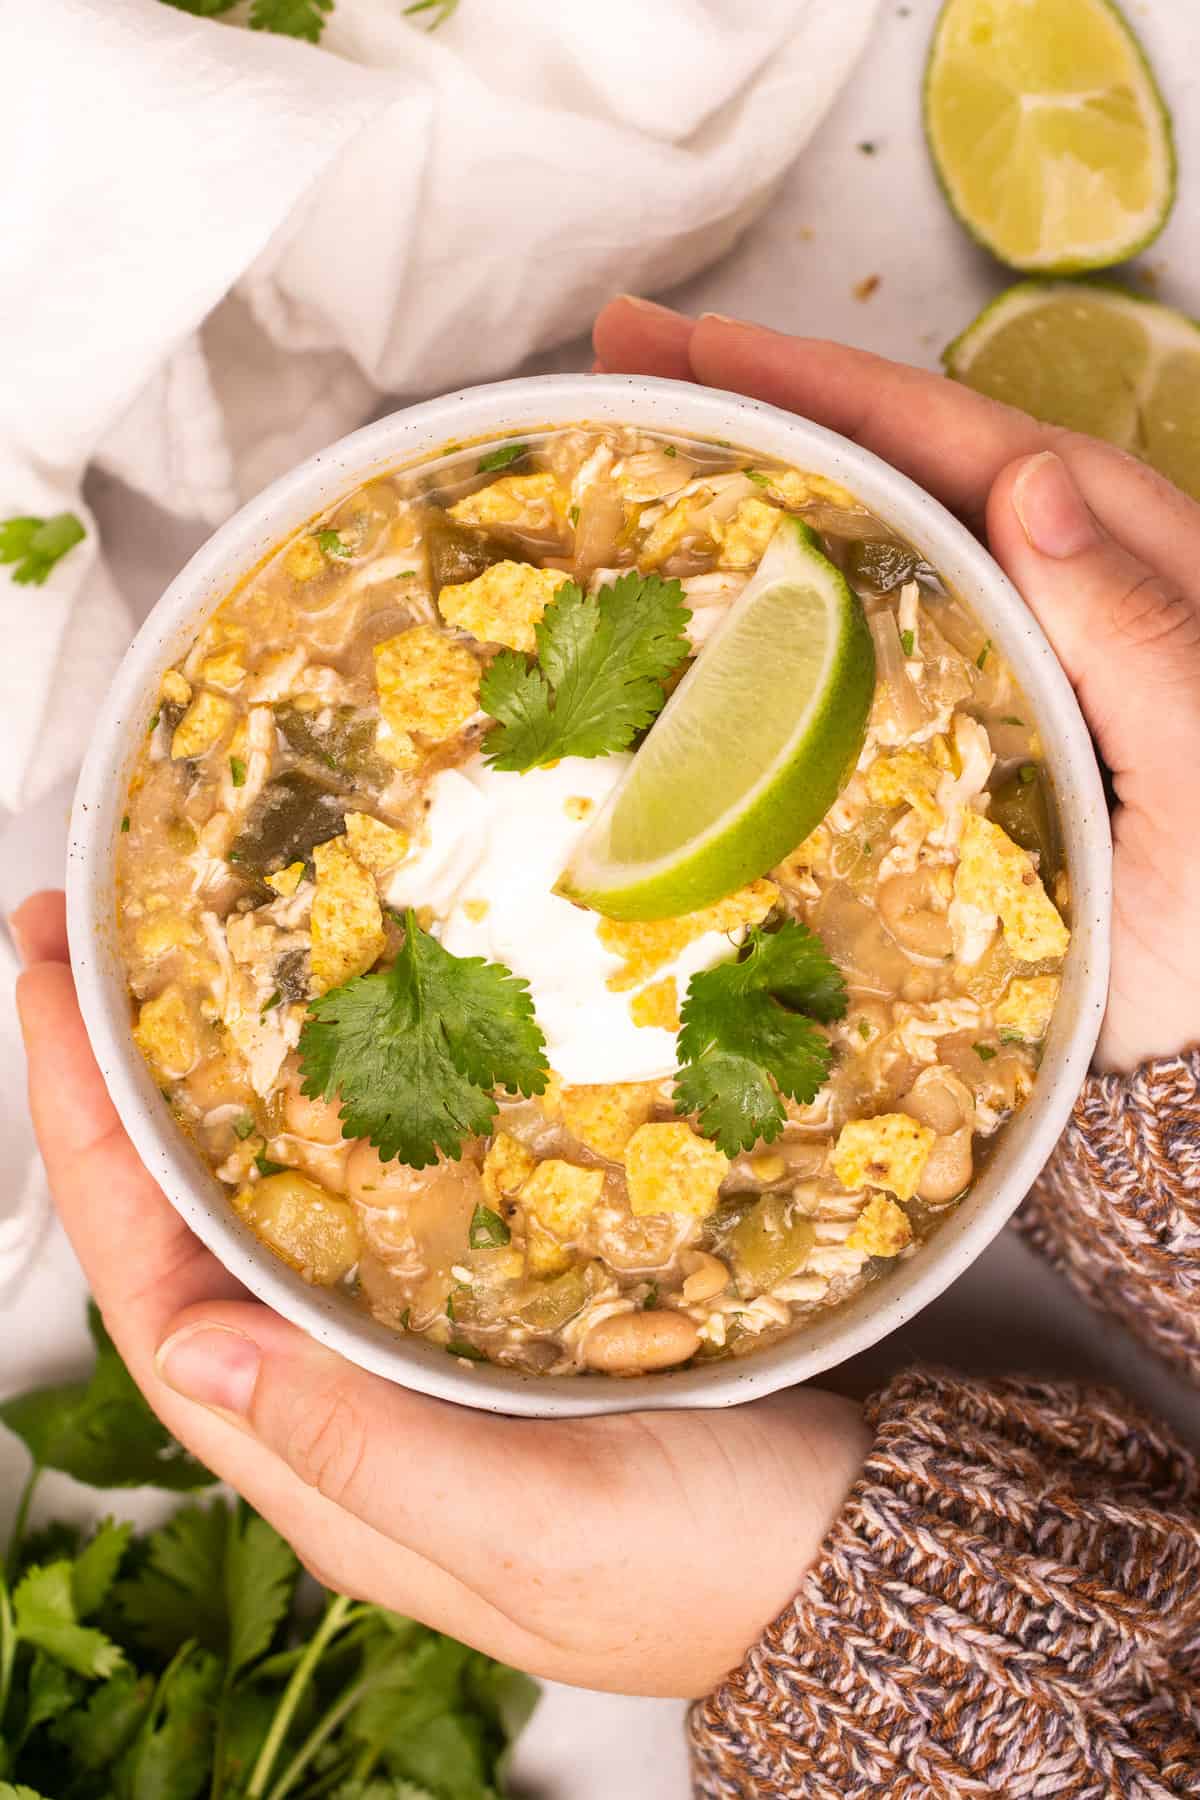 Hands holding healthy white chicken chili in a bowl.